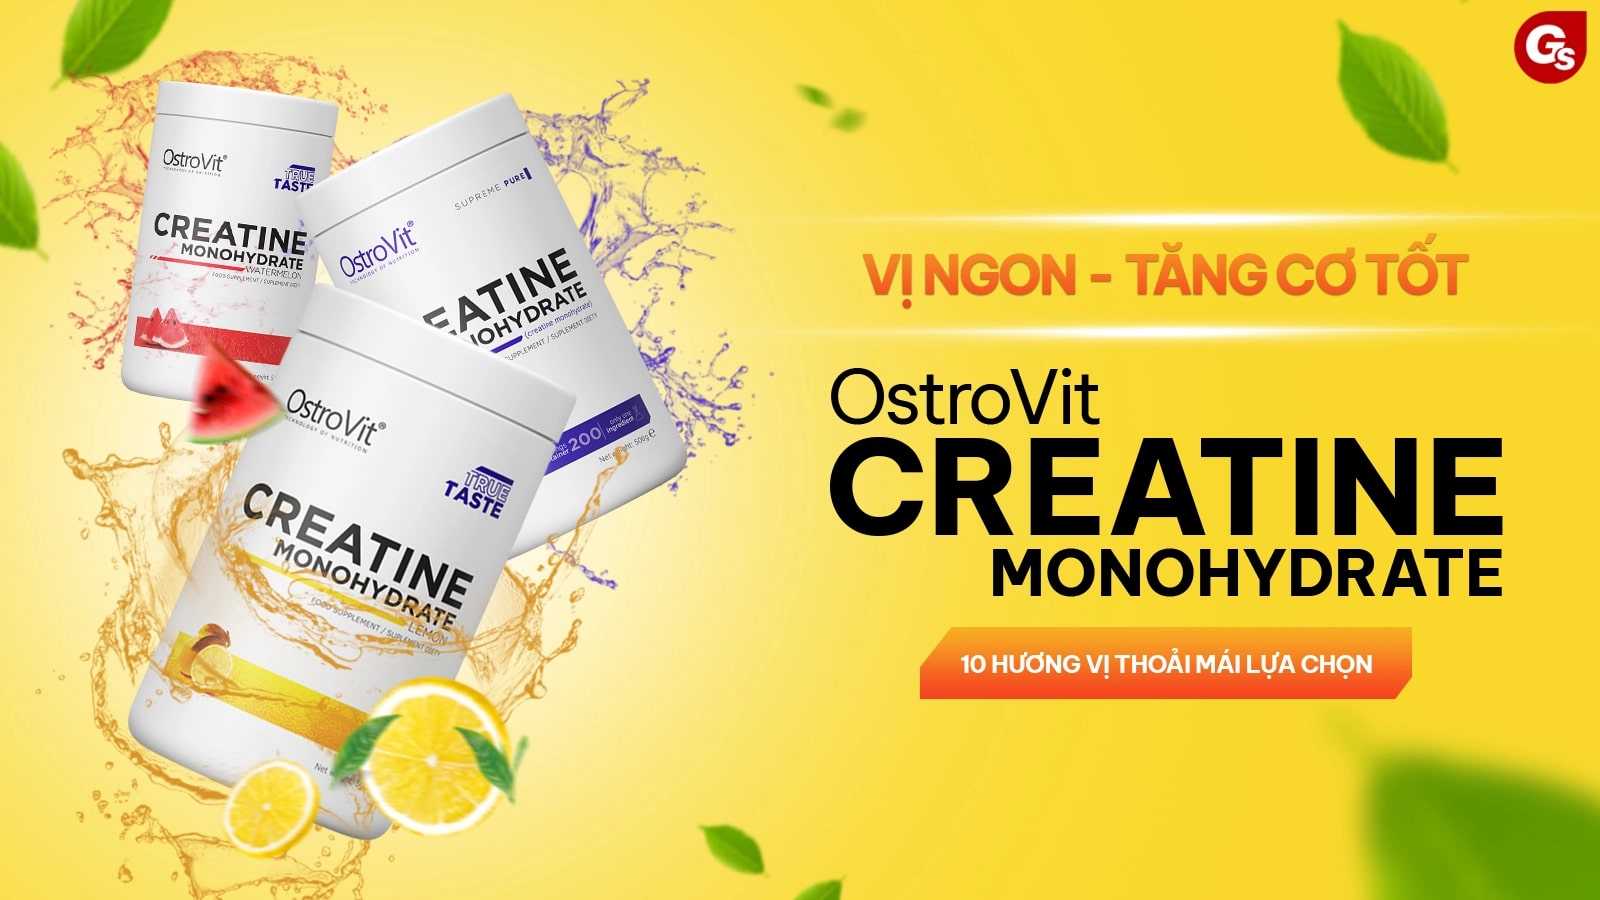 danh-gia-review-ostrovit-creatine-gymstore-1